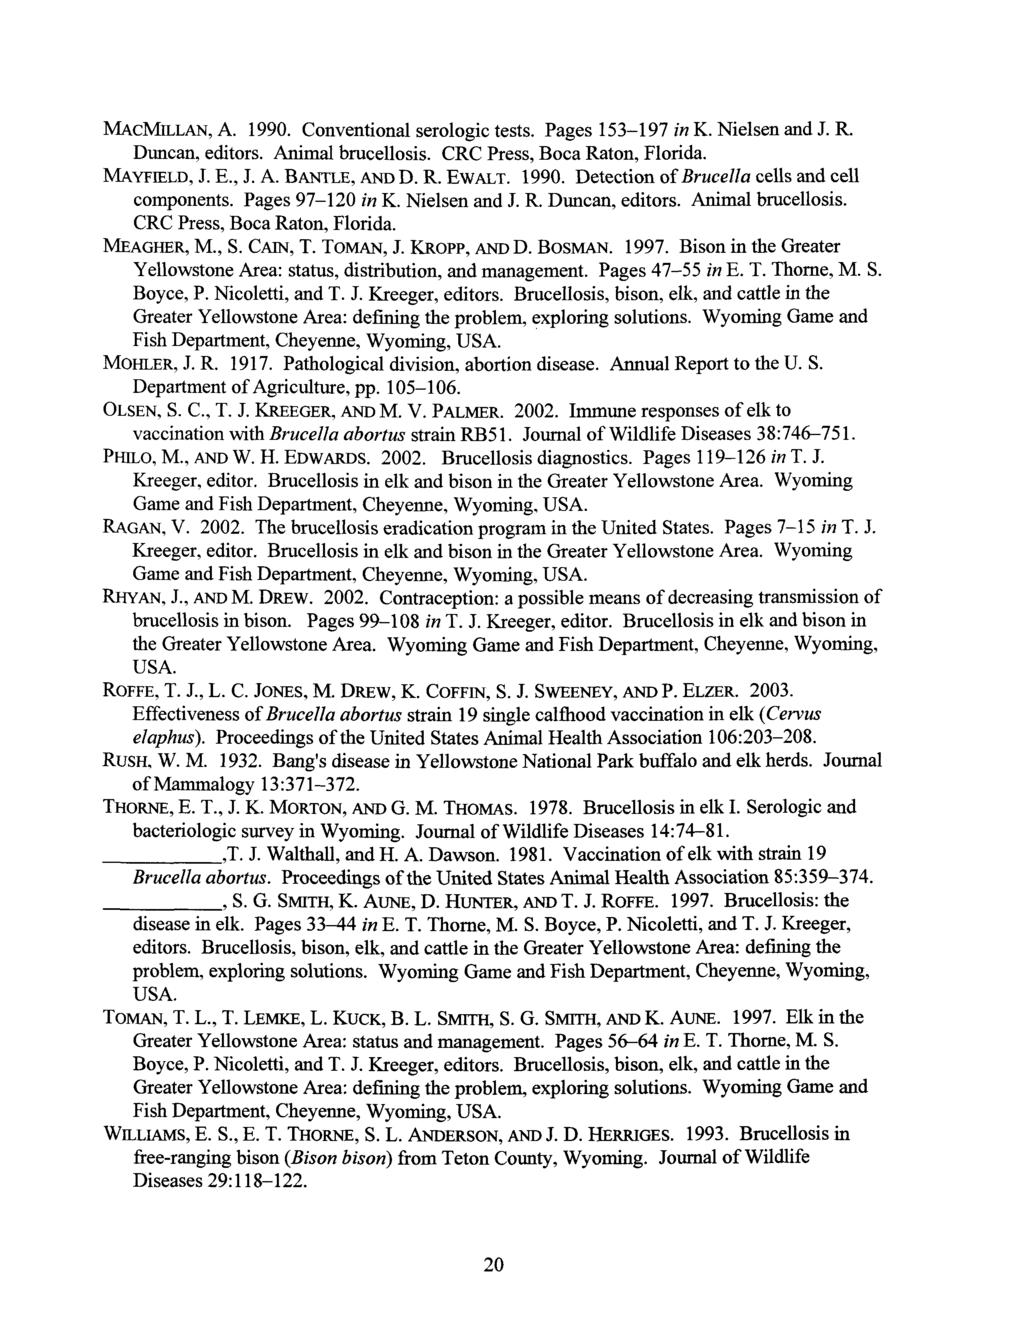 MACMILLAN, A. 1990. Conventional serologic tests. Pages 153-1 97 in K. Nielsen and J. R. Duncan, editors. Animal brucellosis. CRC Press, Boca Raton, Florida. MAYFIELD, J. E., J. A. BANTLE, AND D. R. EWALT.